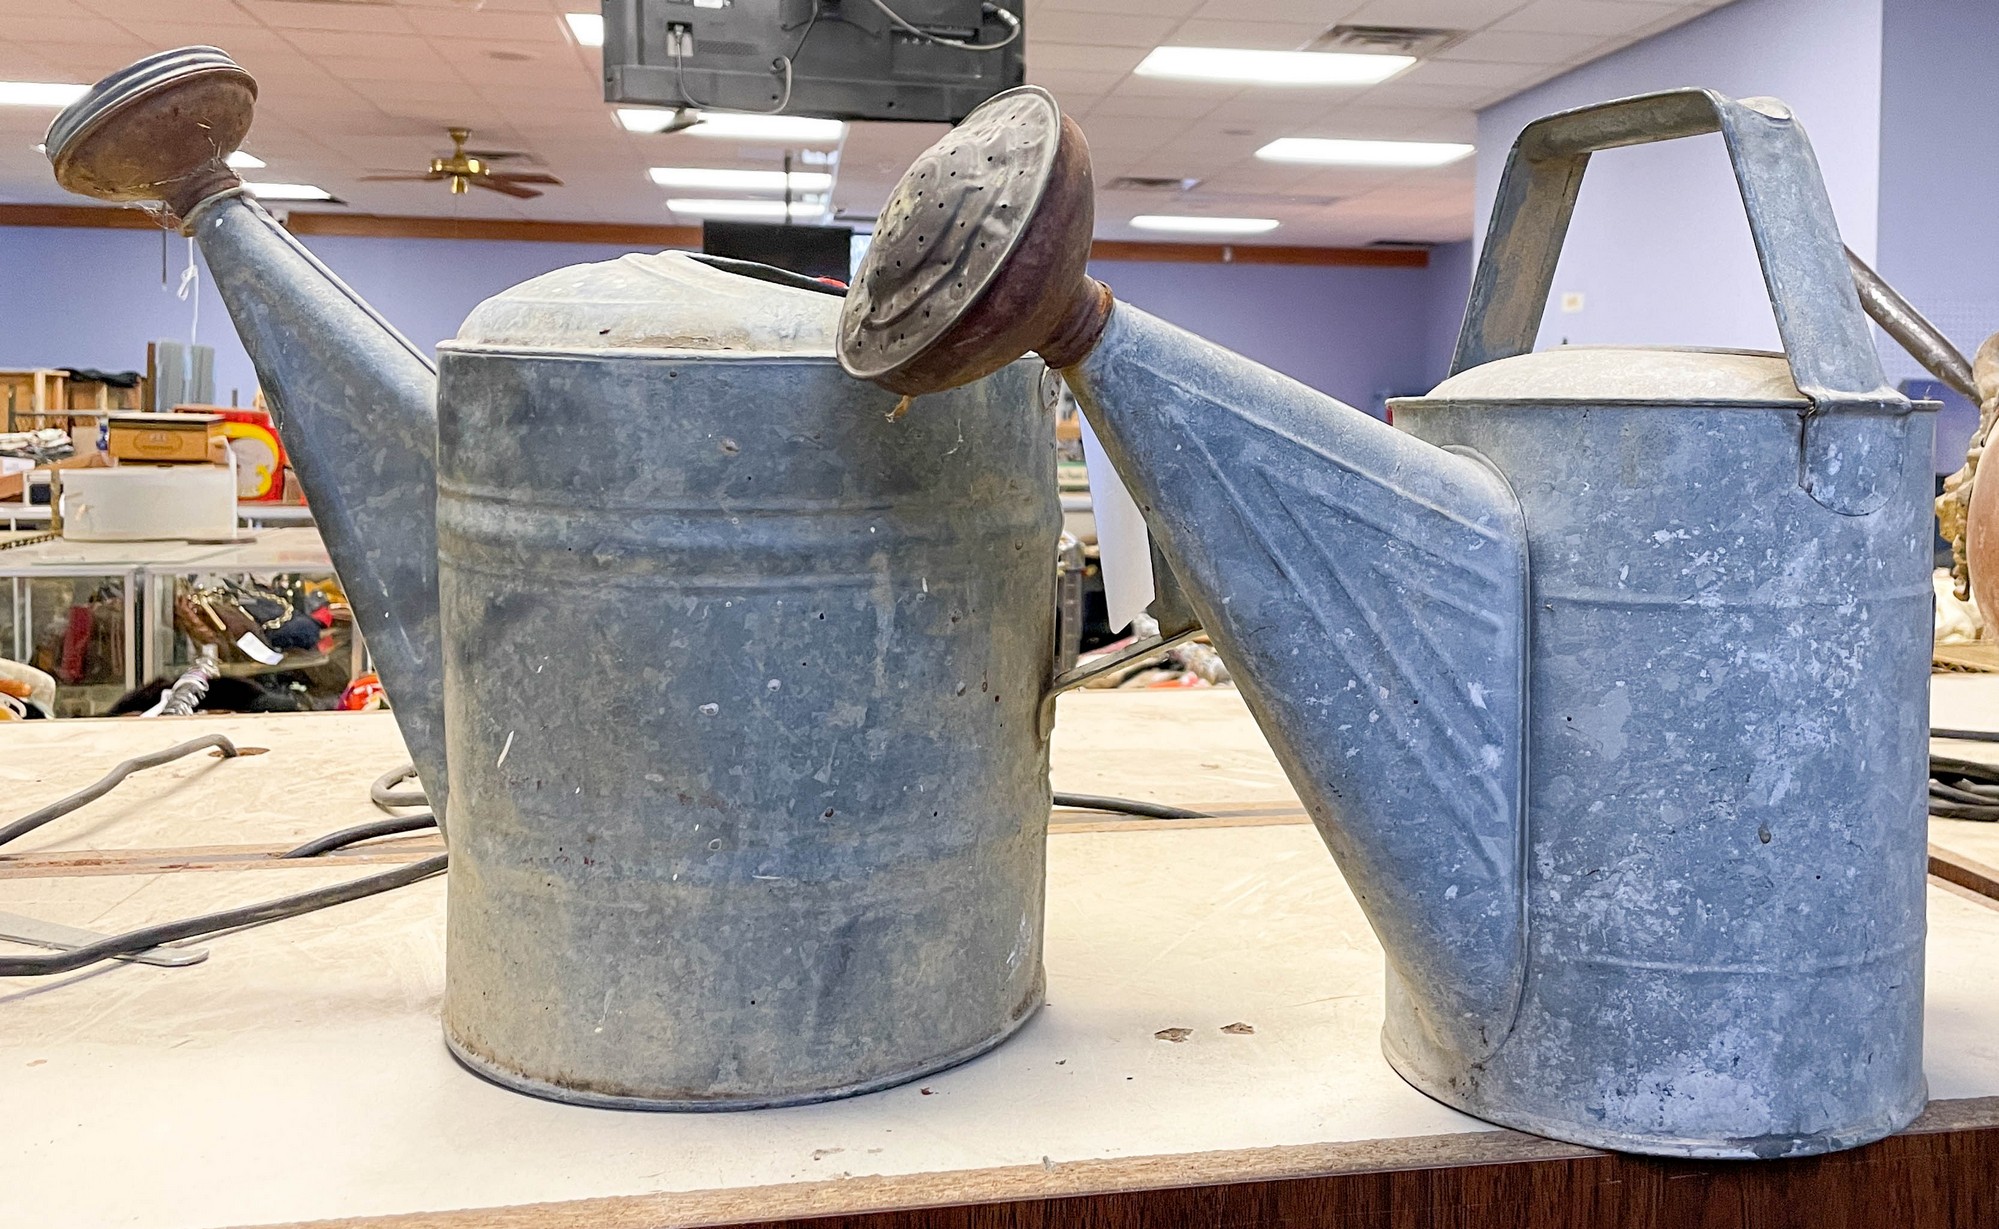  2 Galvanized tin watering cans  2781e0